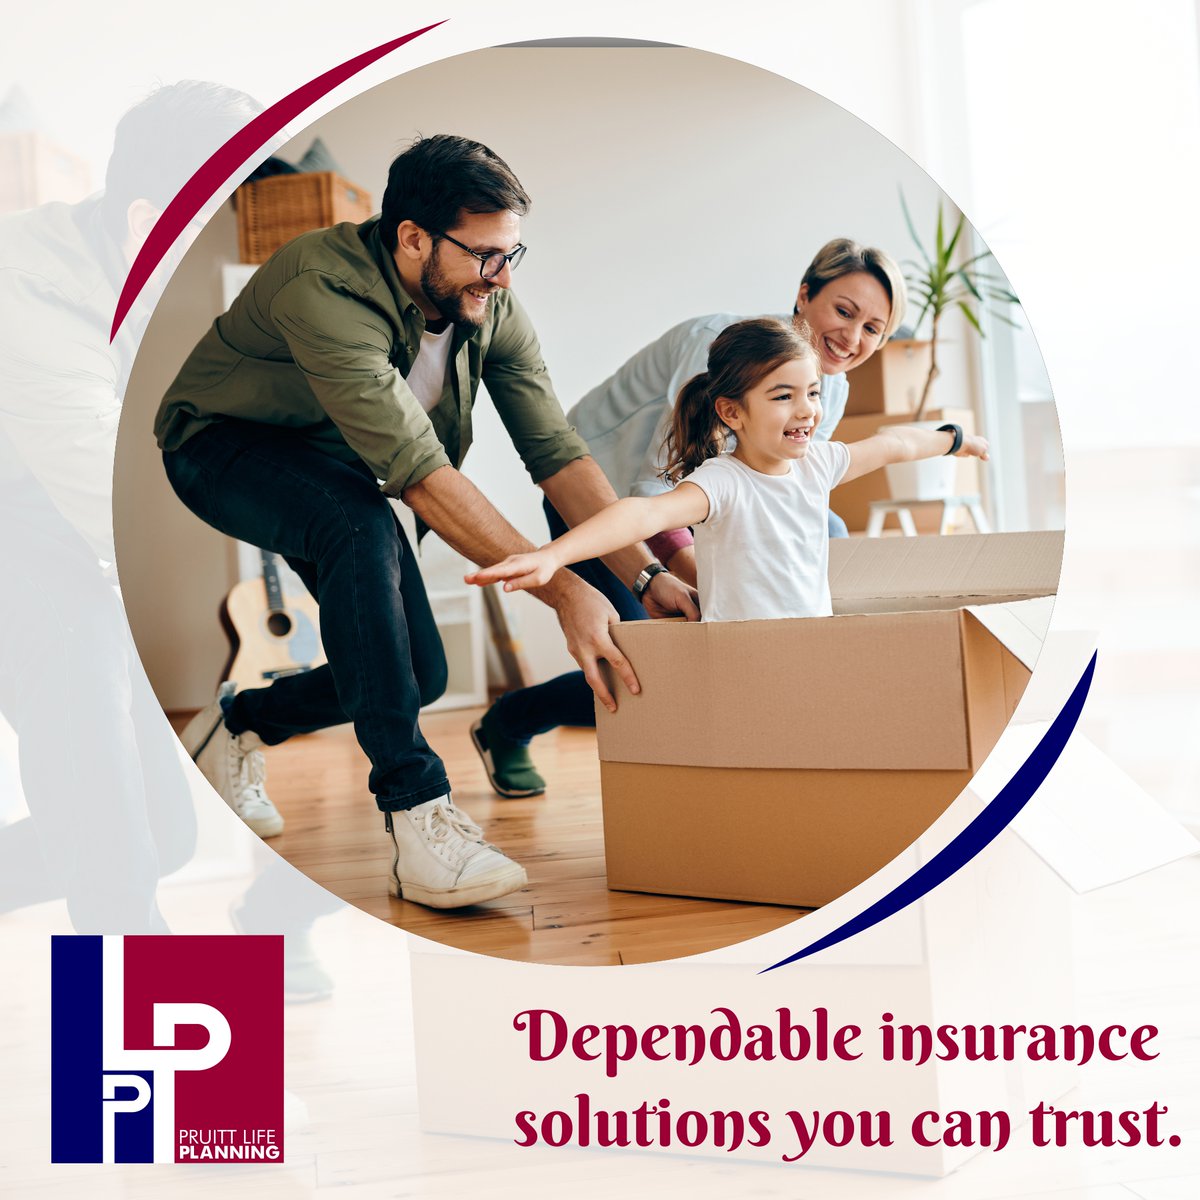 ✨ Count on us for dependable insurance solutions that safeguard your future with confidence.

Call Us On +1 931-319-6833

#PruittLifePlanning #InsuranceSolutions #TrustworthyAdvisors #FinancialSecurity #PeaceOfMind #DependableService #InsuranceCoverage #FinancialPlanning